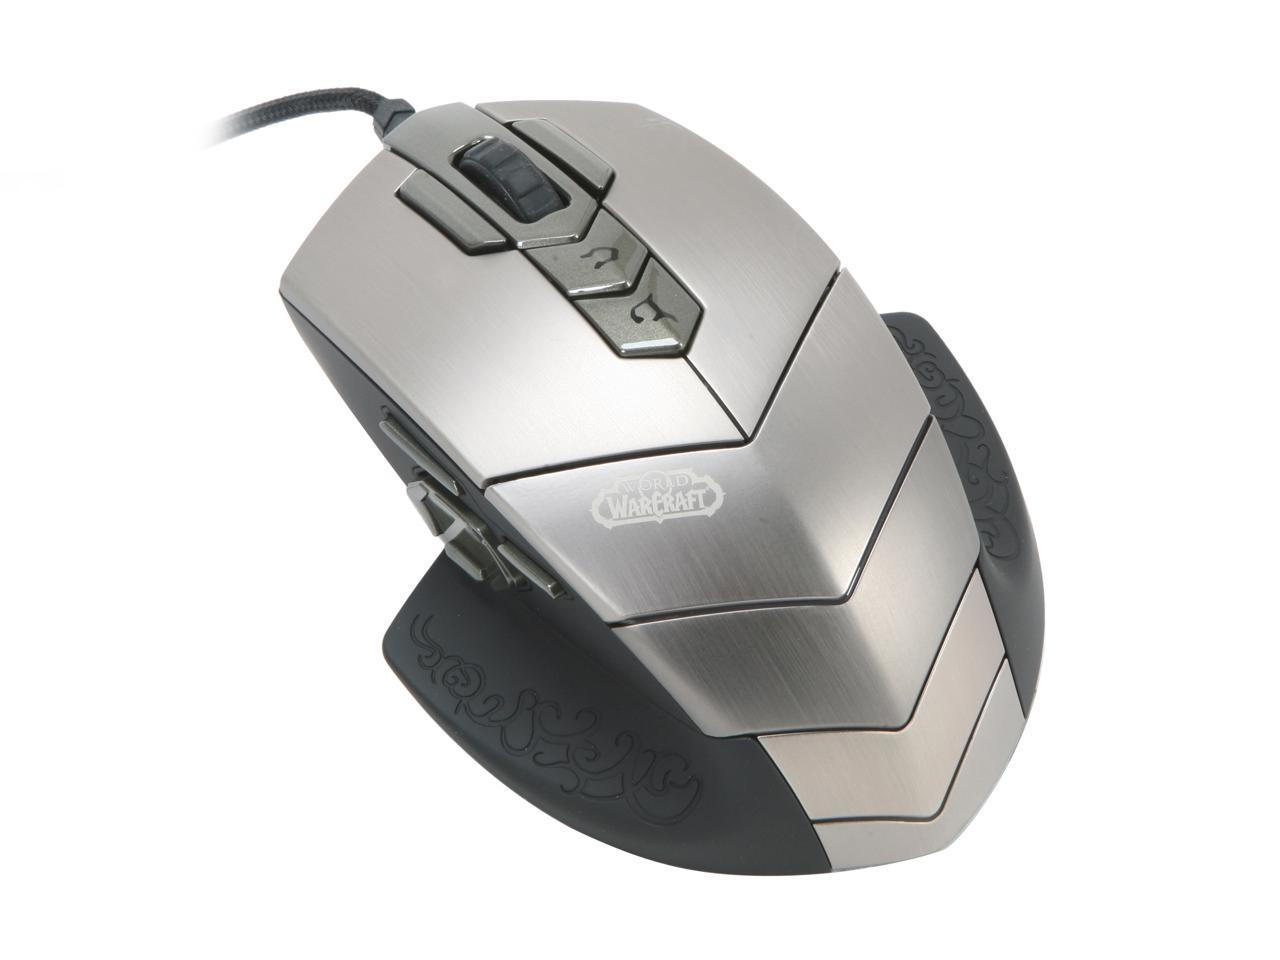 steelseries wow mouse mac